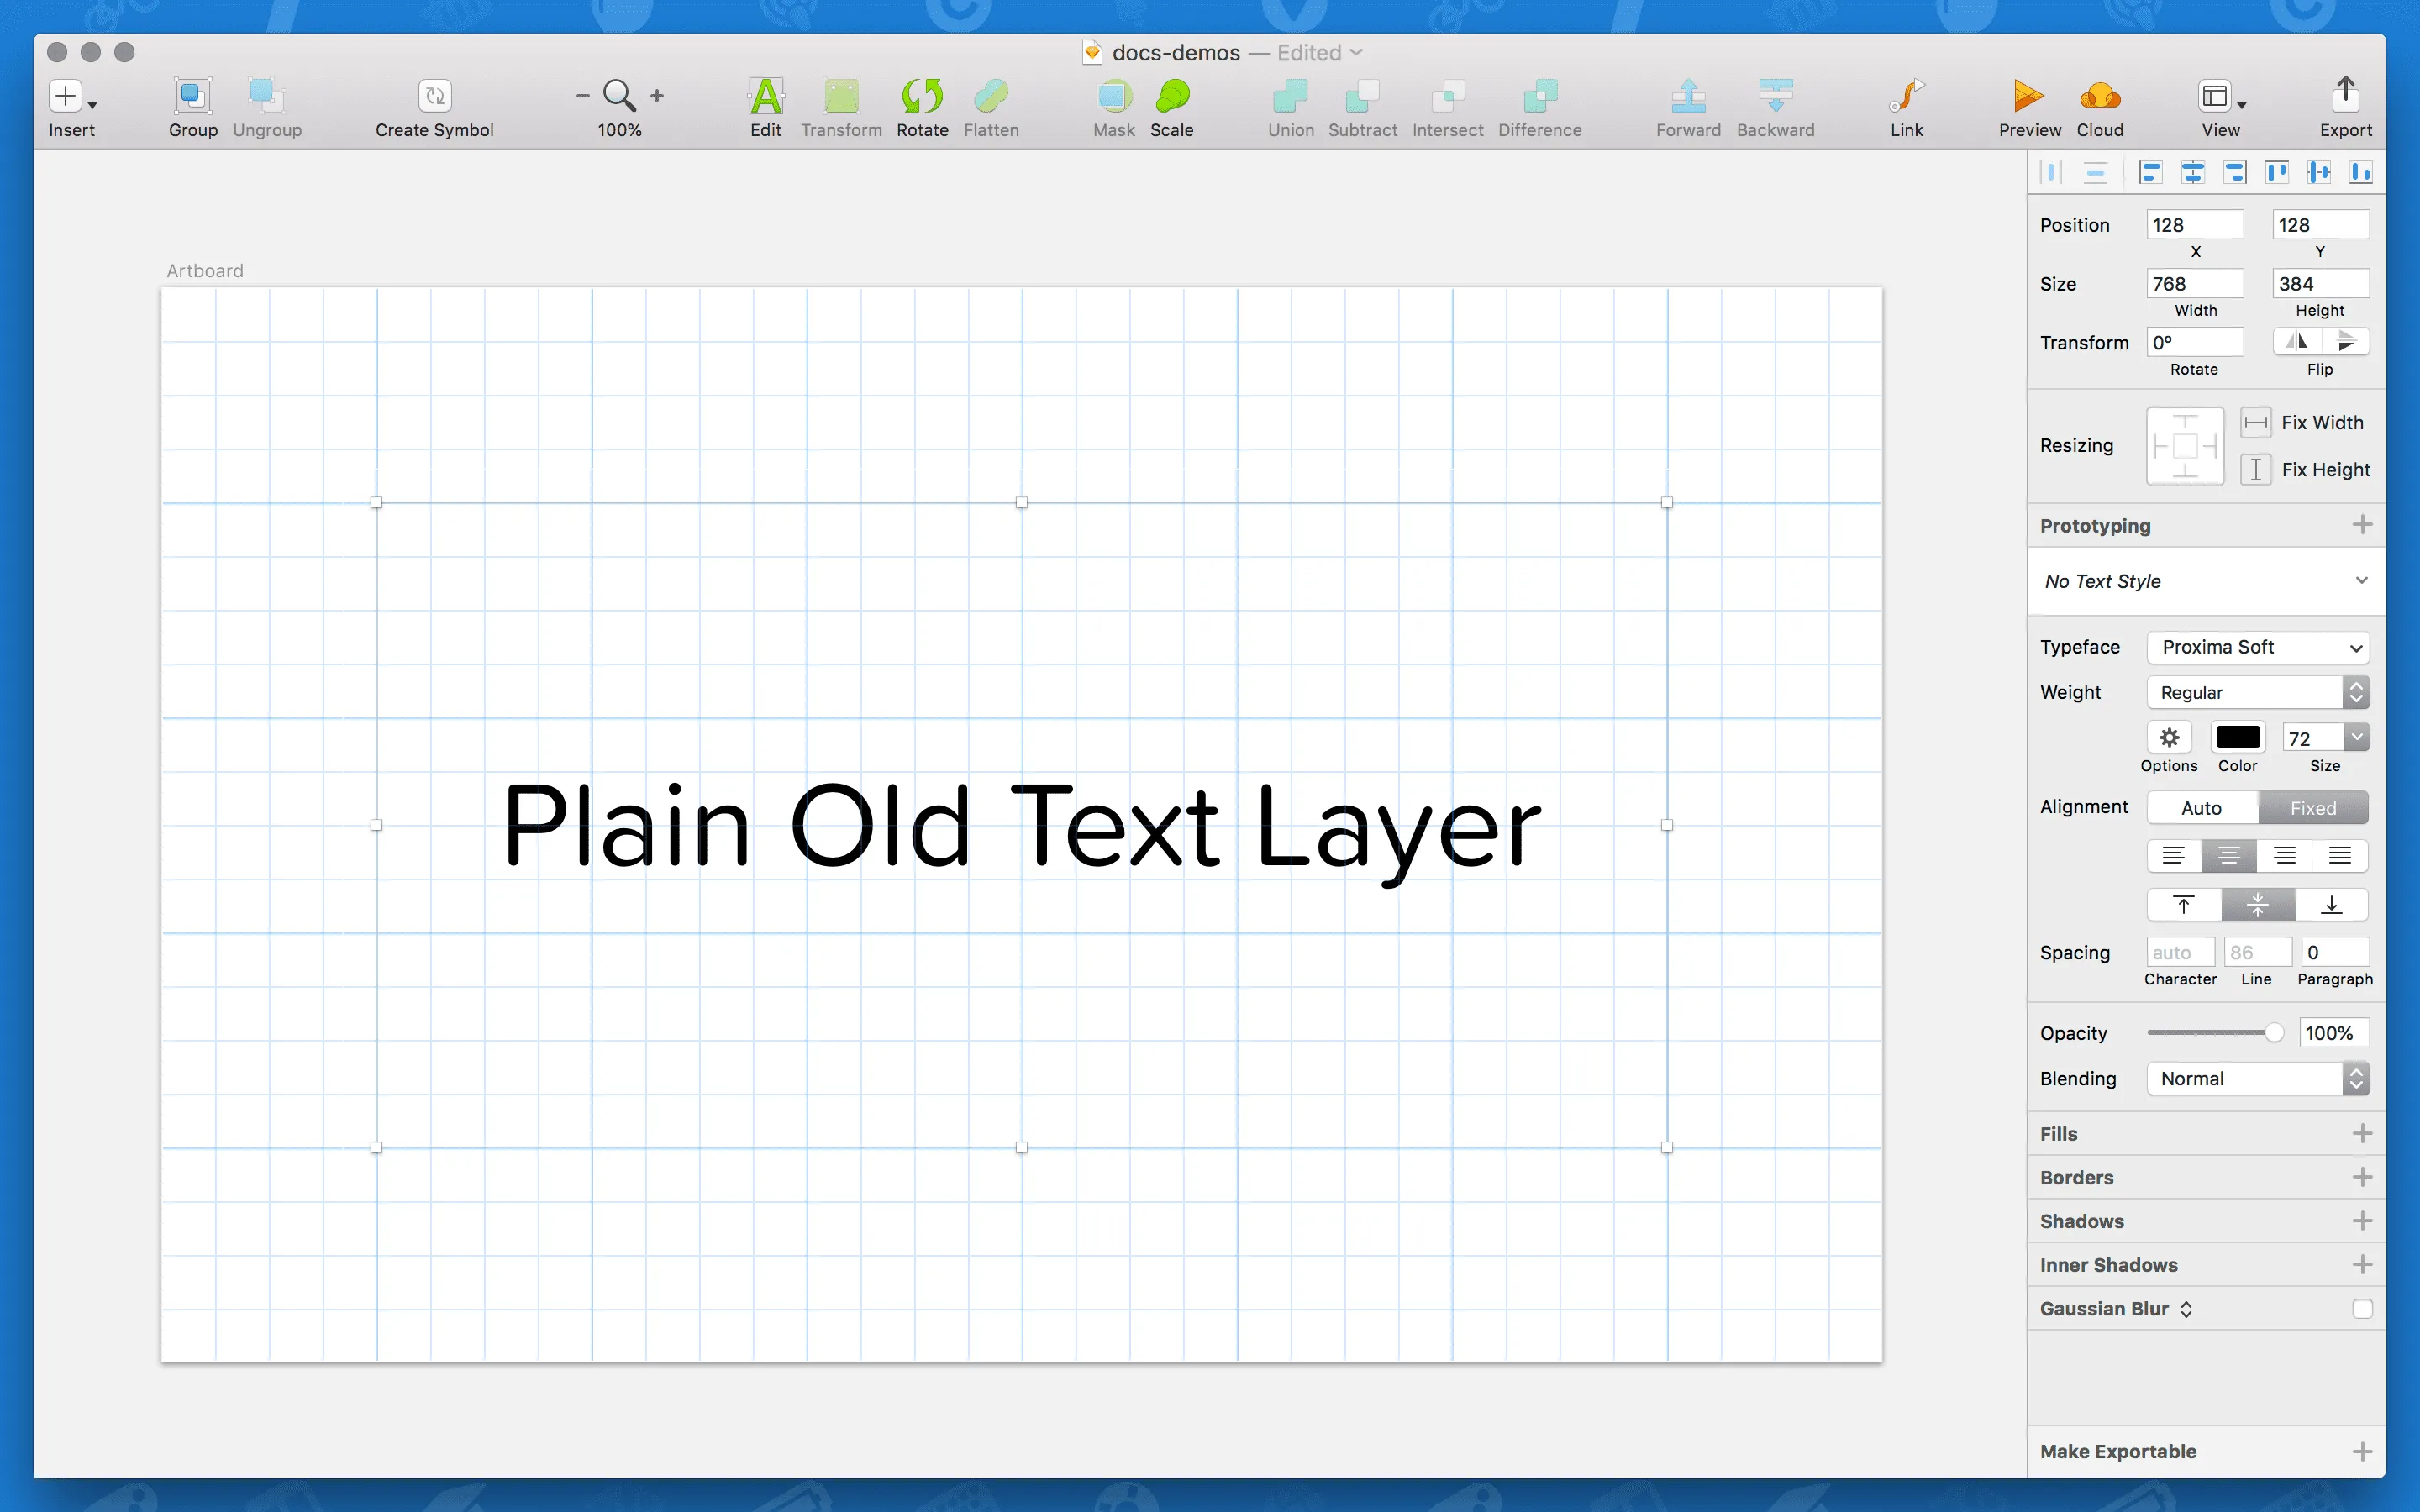 A new text layer created in a Sketch document